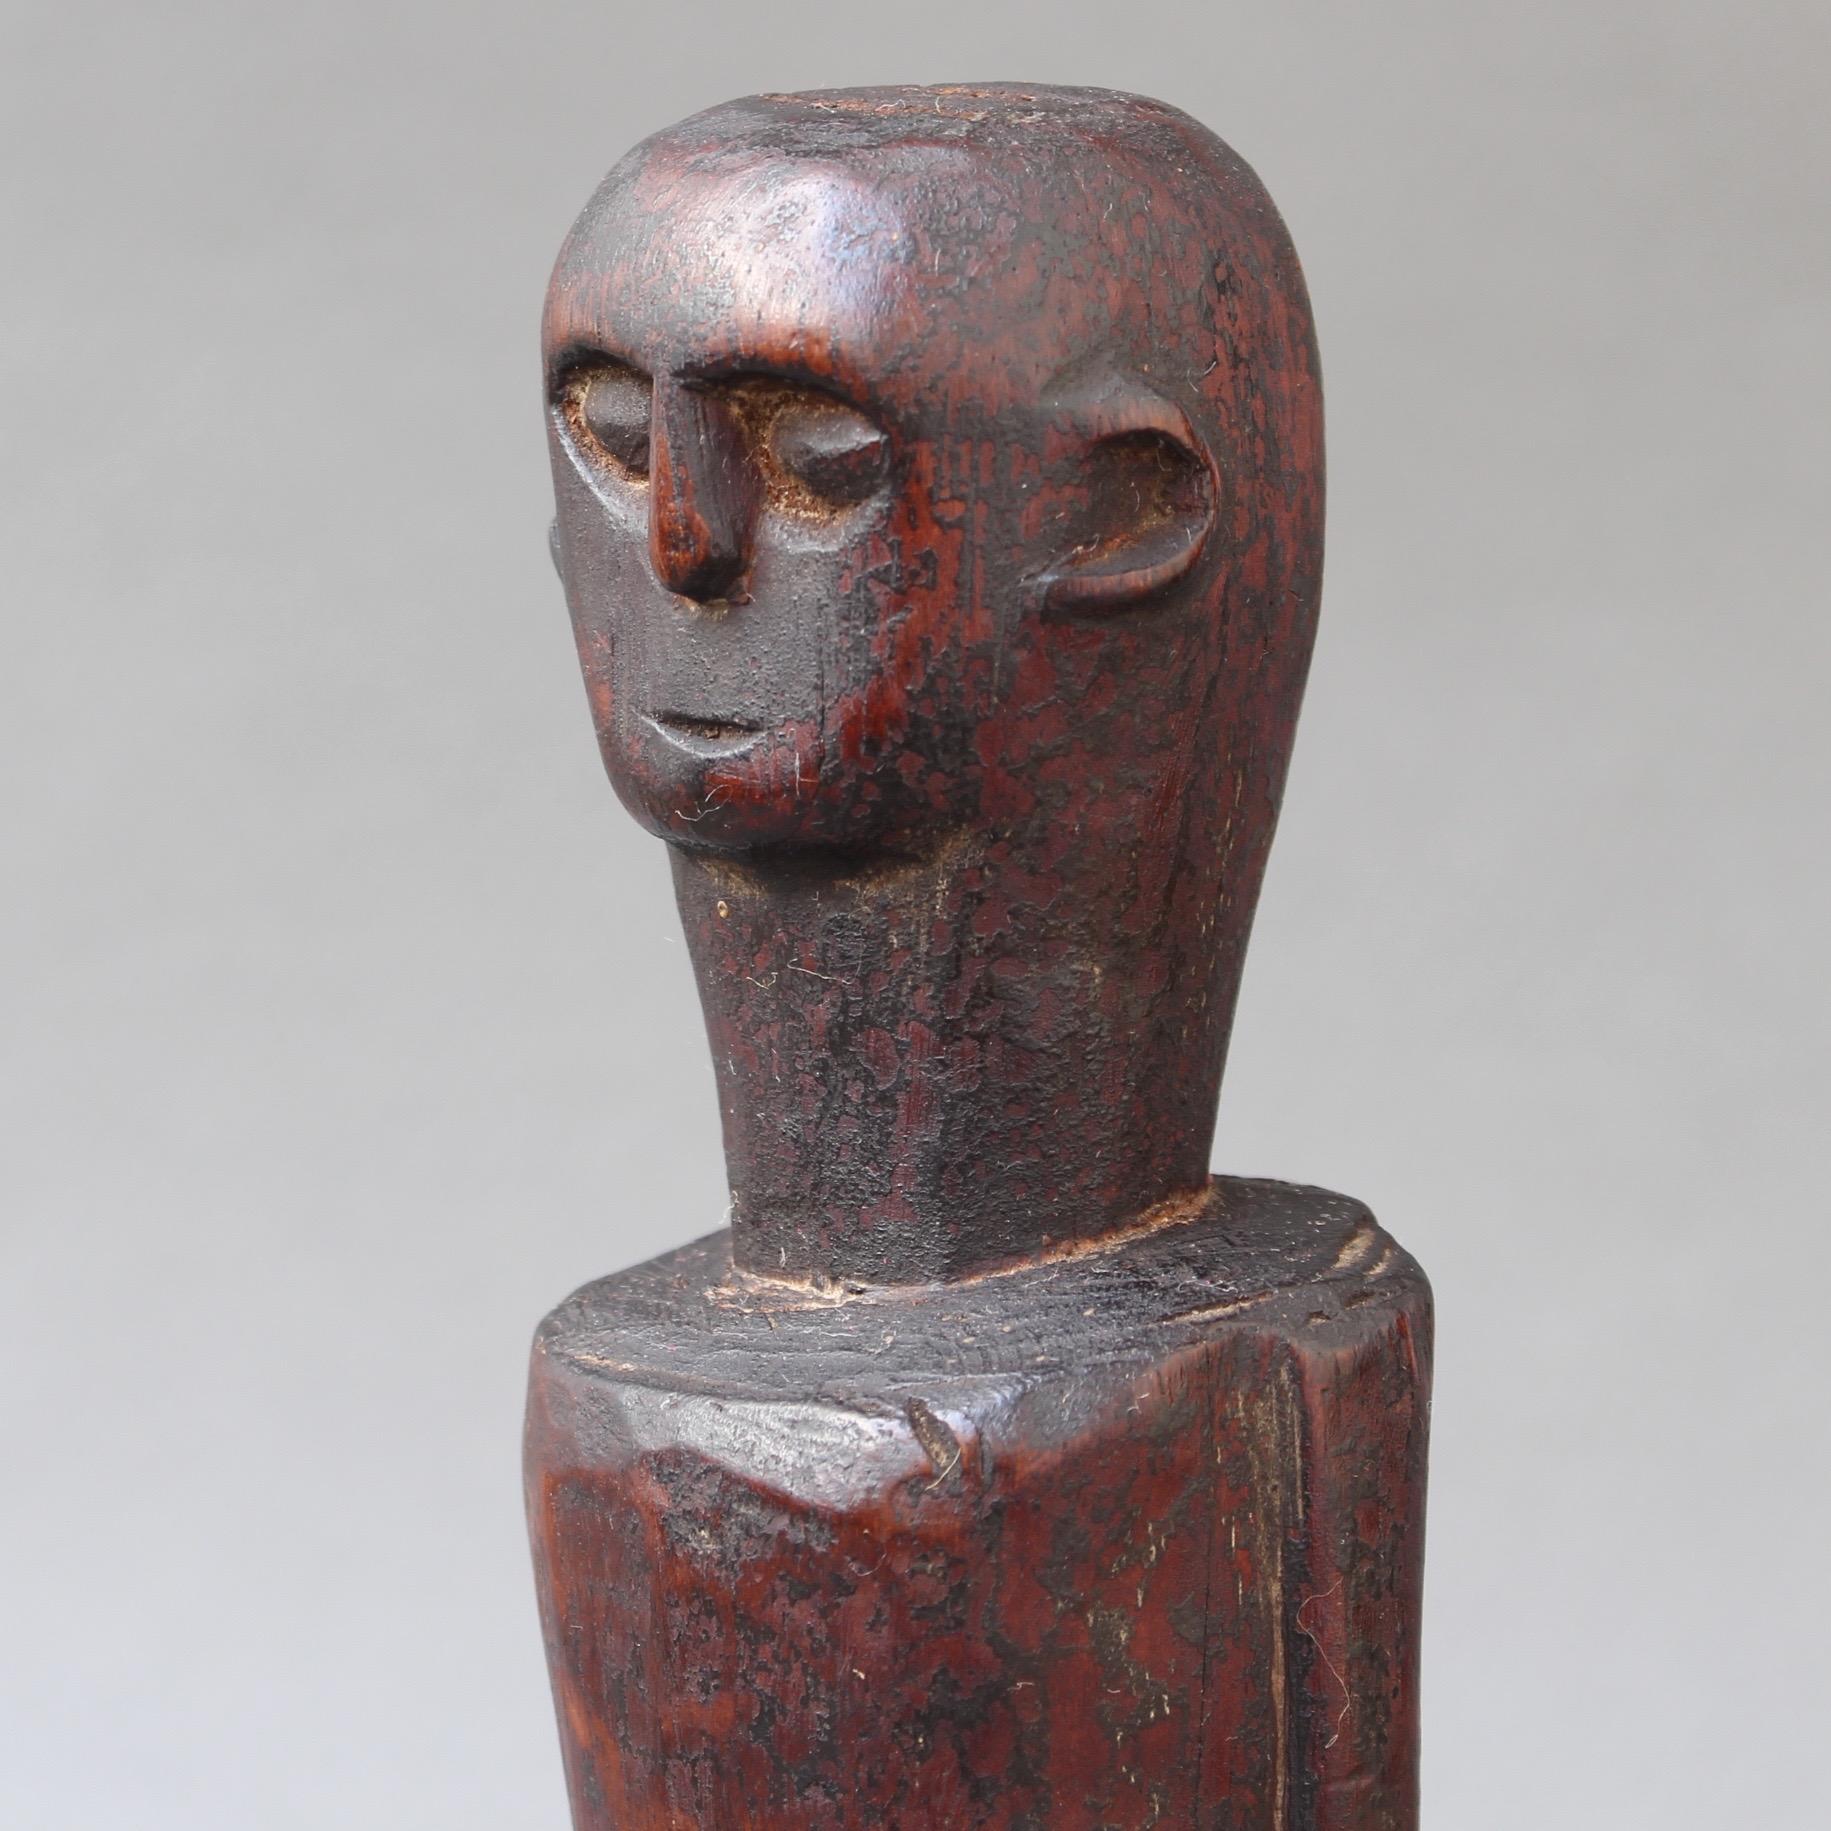 Wooden Sculpture or Carving of Fertility Figure from Sumba Island, Indonesia 8